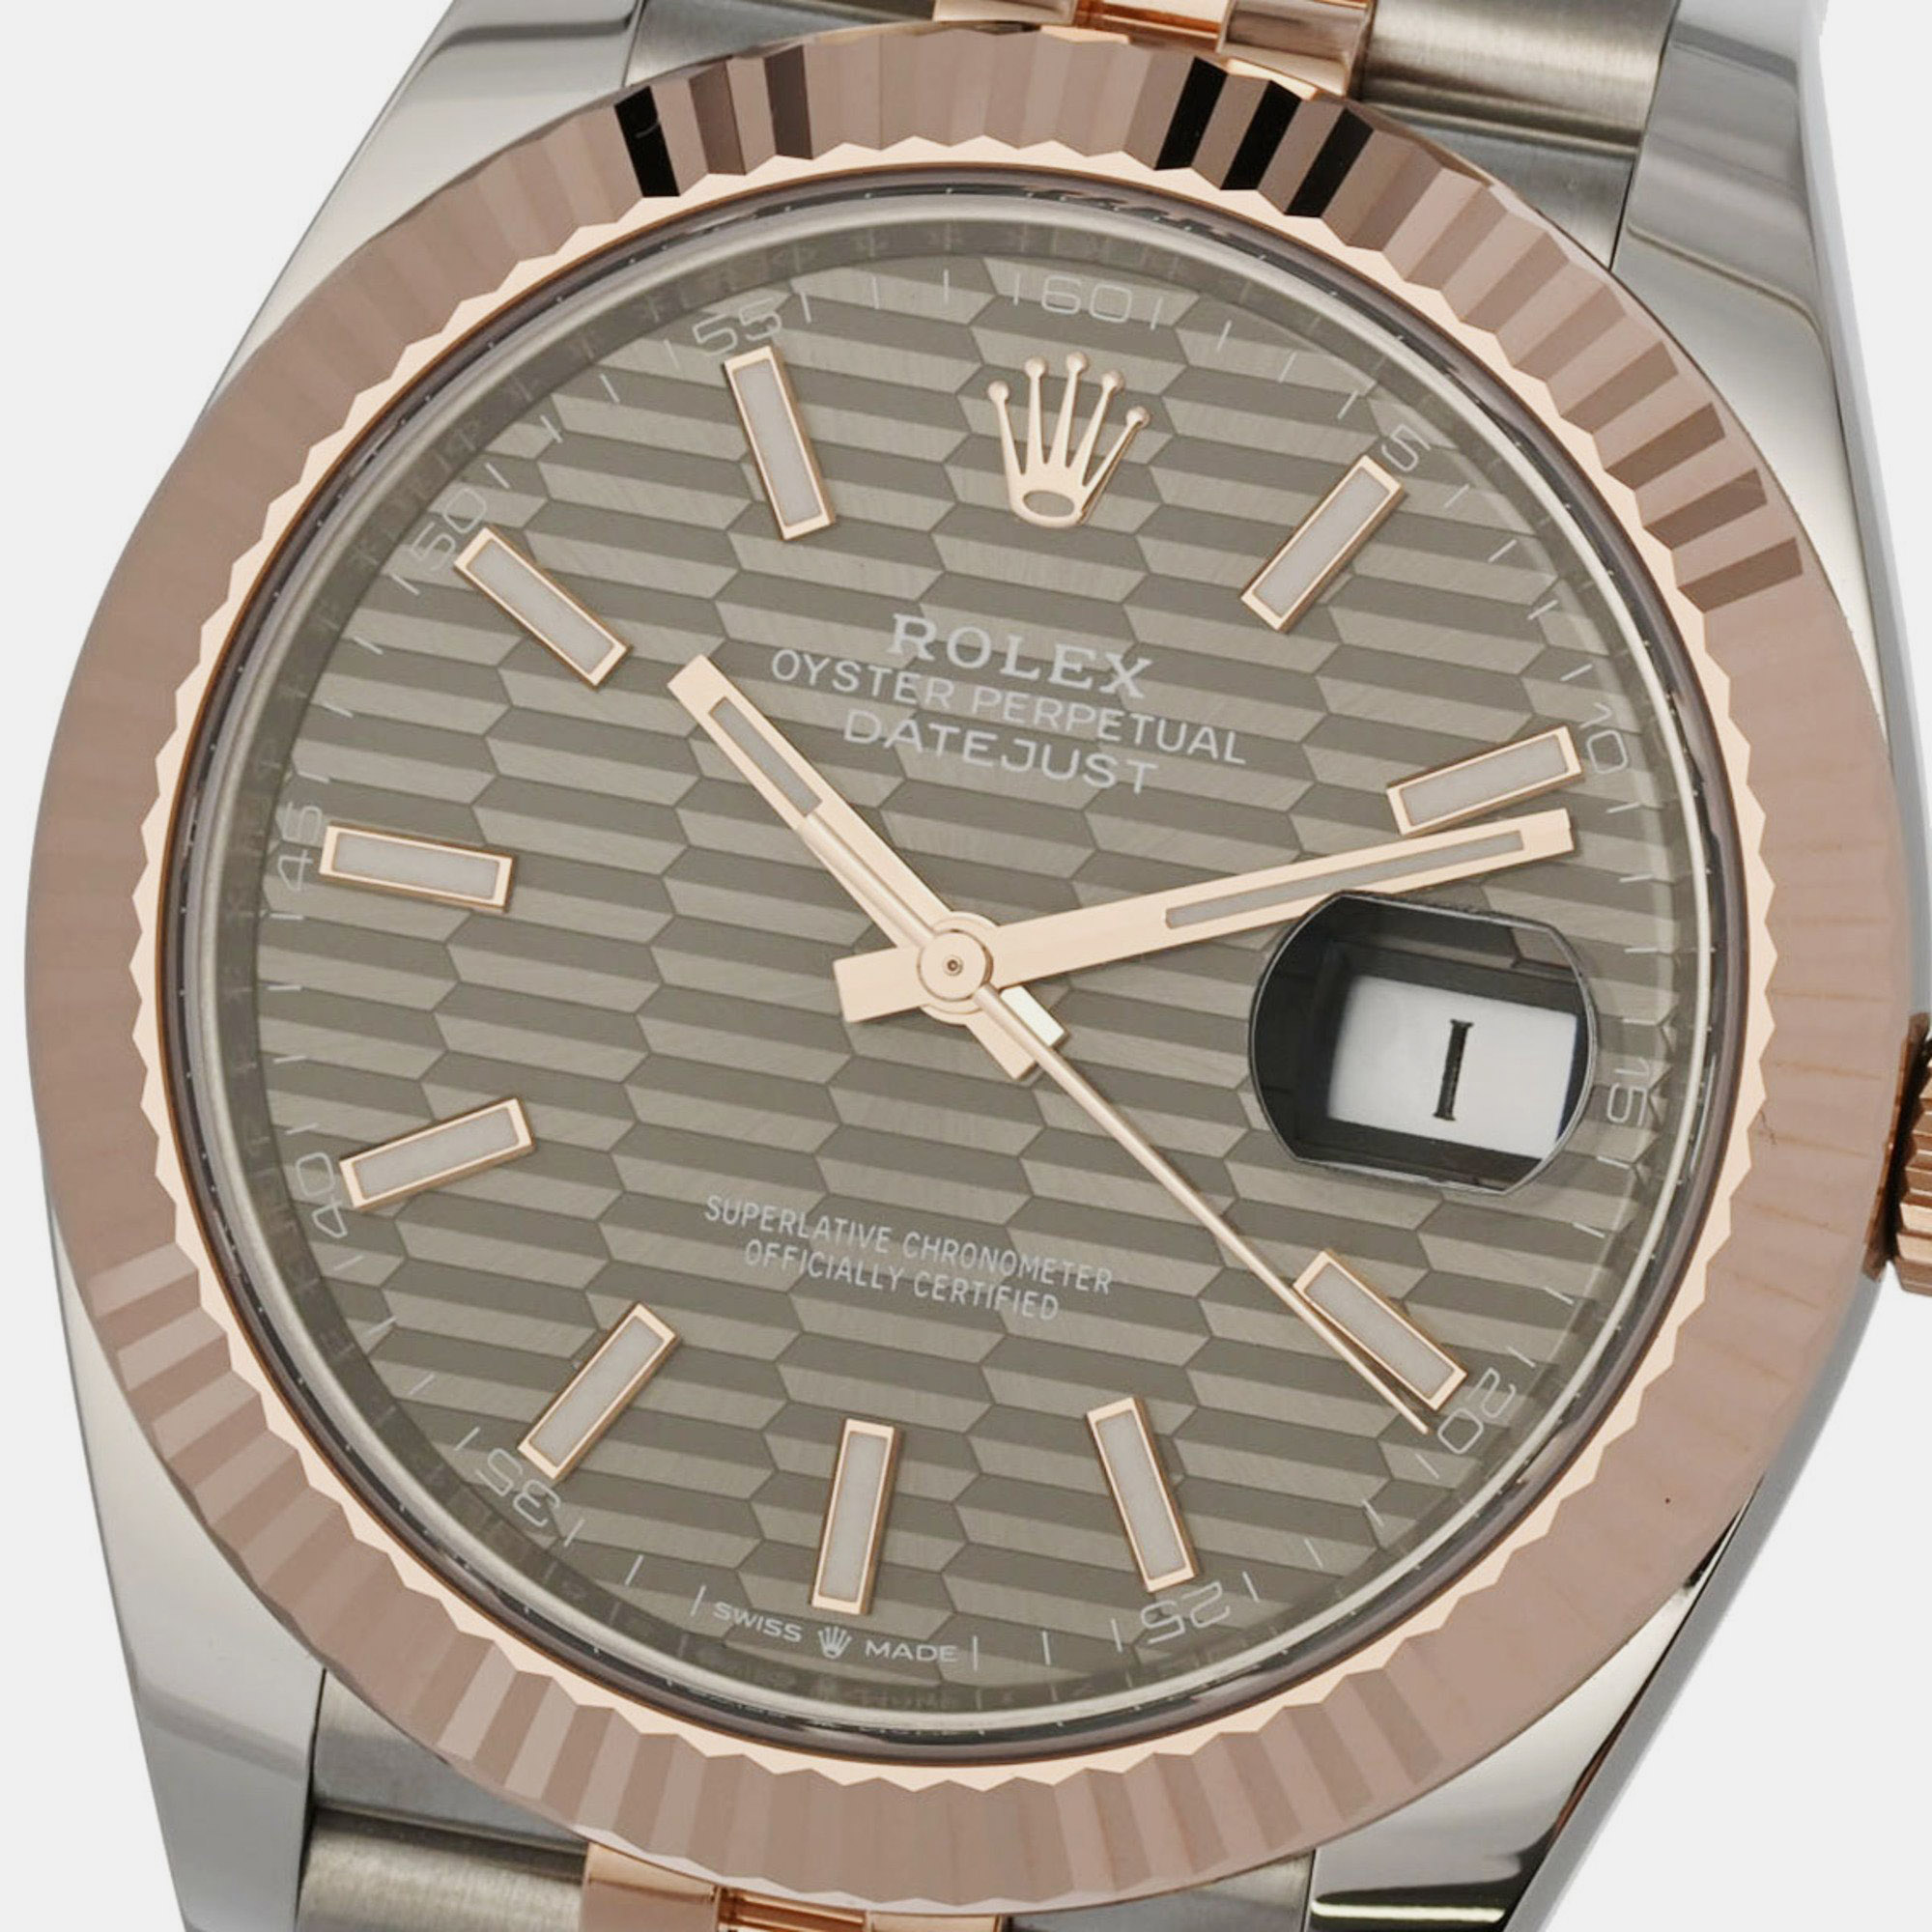 

Rolex Grey 18k Rose Gold And Stainless Steel Datejust 126331 Automatic Men's Wristwatch 41 mm